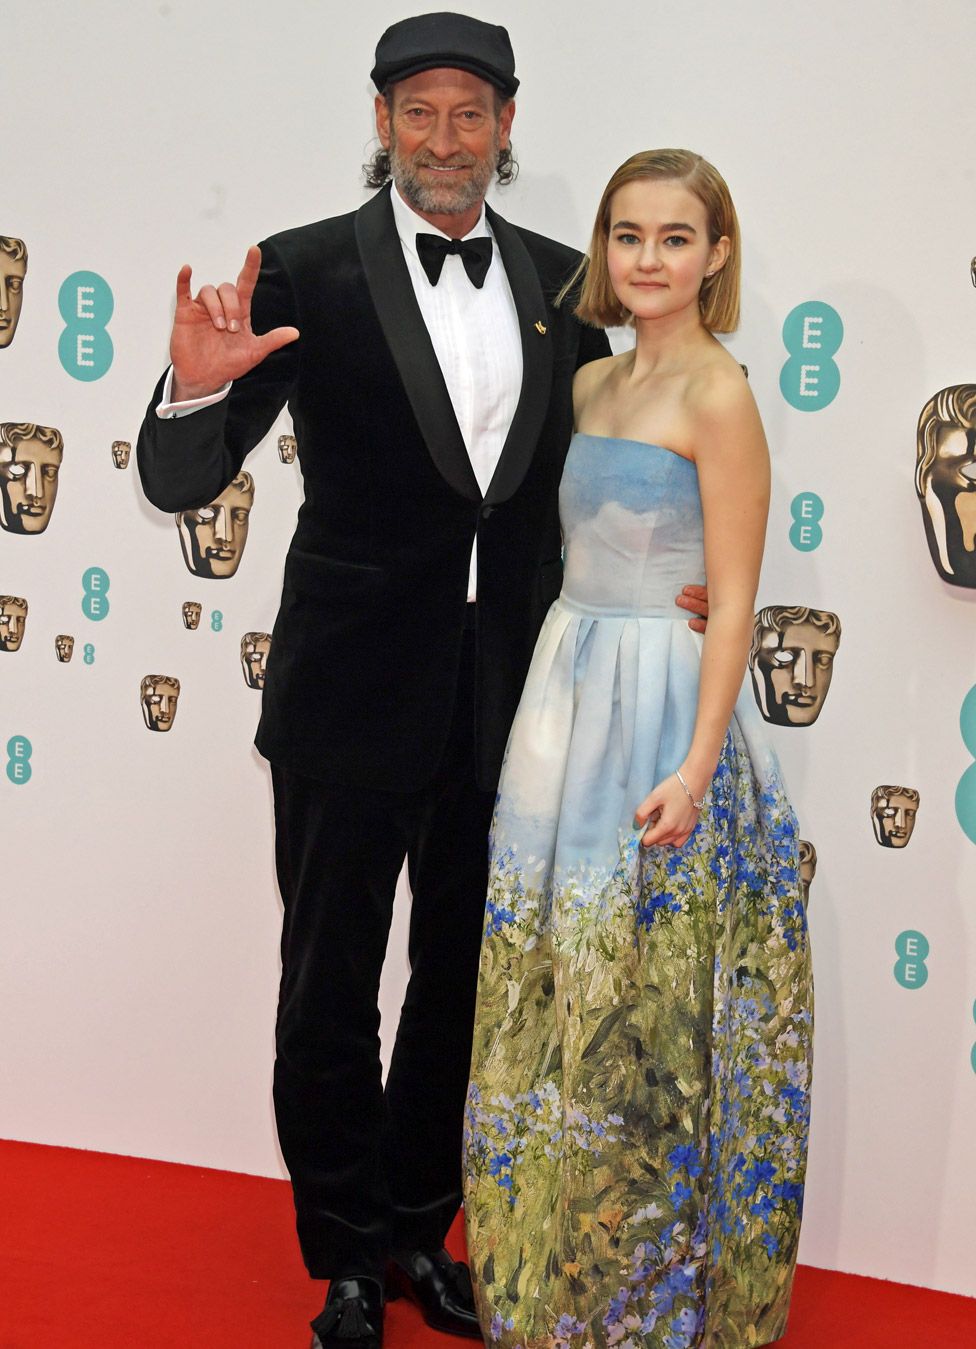 Troy Kotsur and Millicent Simmonds at the 2022 Bafta Film Awards